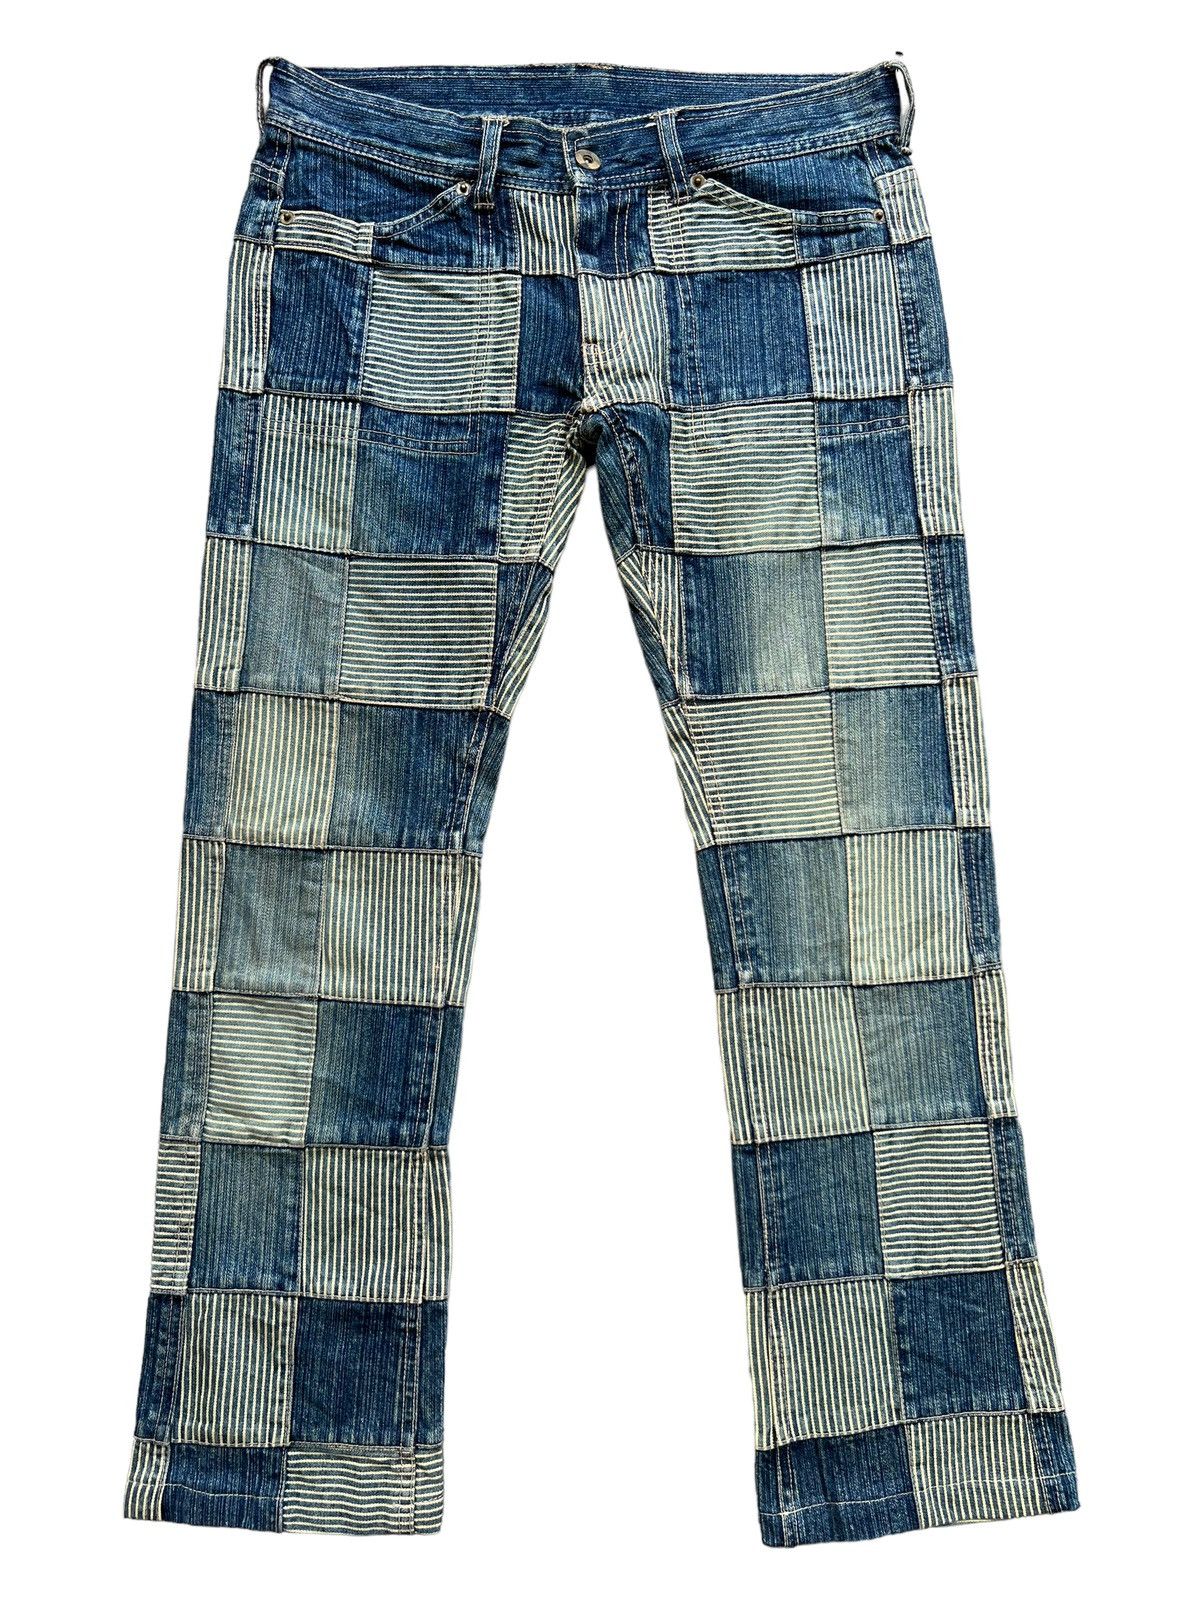 Japanese Brand Inspired by Kapital Patchwork Jeans 31x28.5 - 2